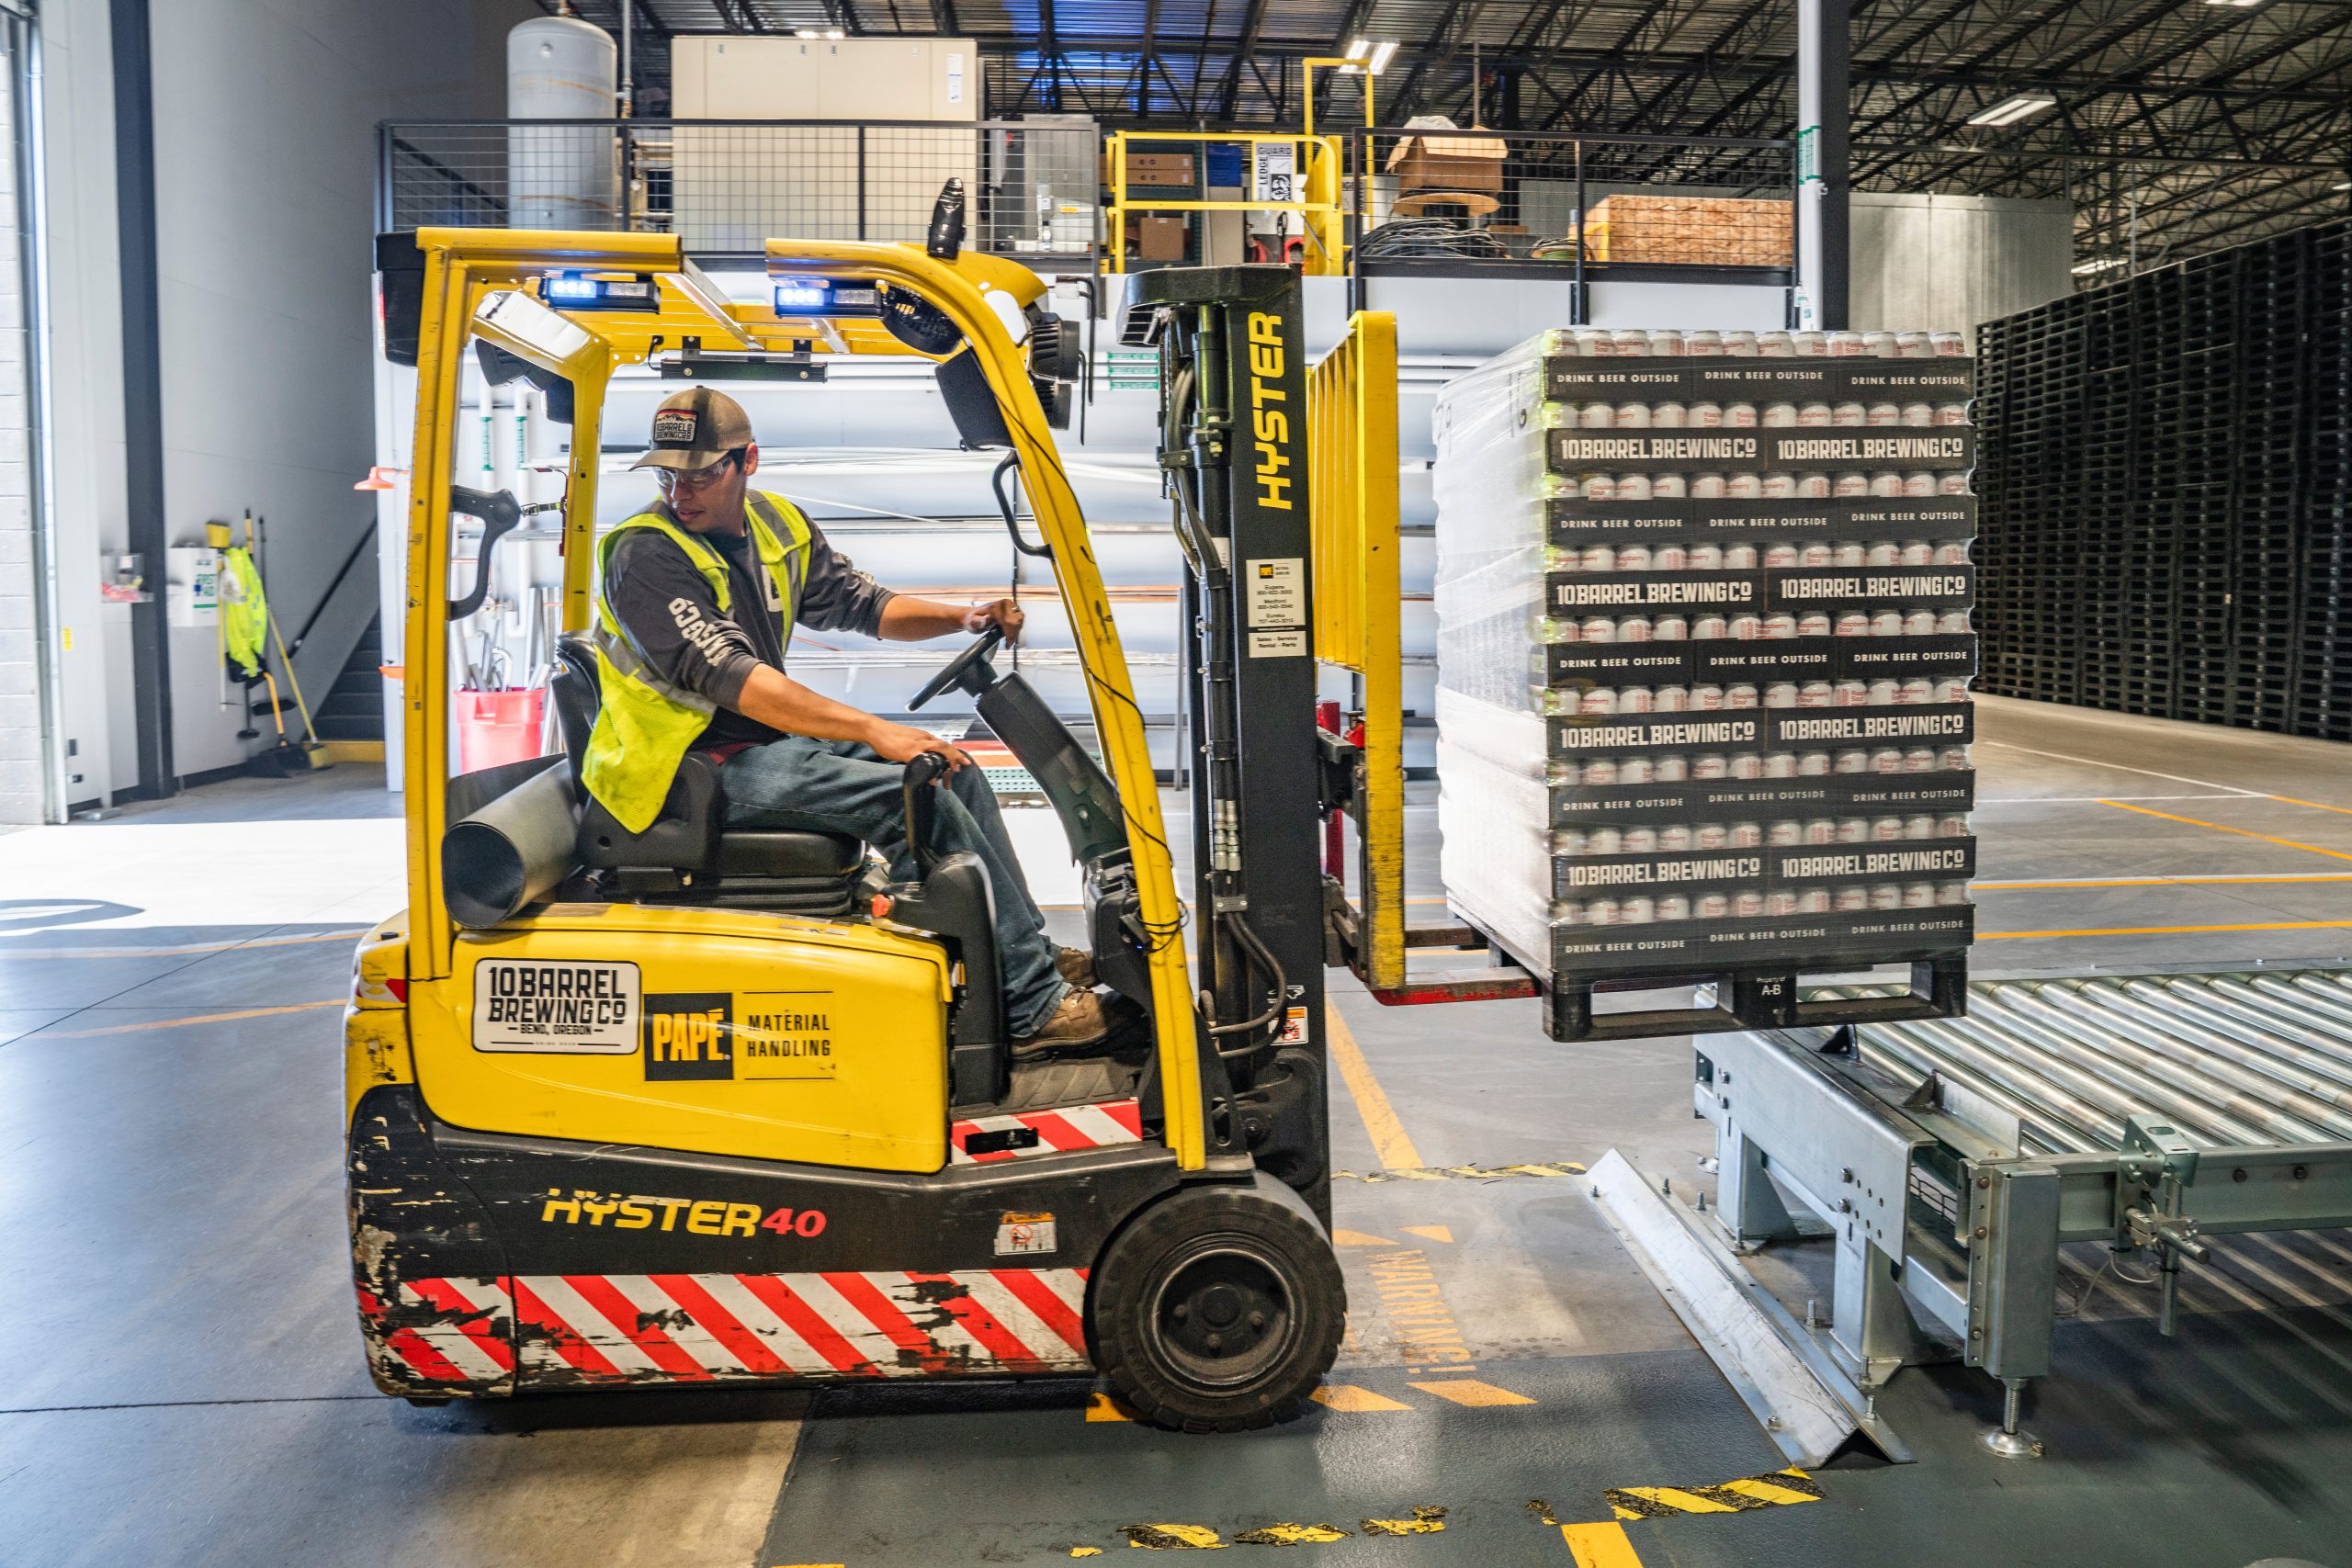 Distribution worker using a forklift in a warehouse